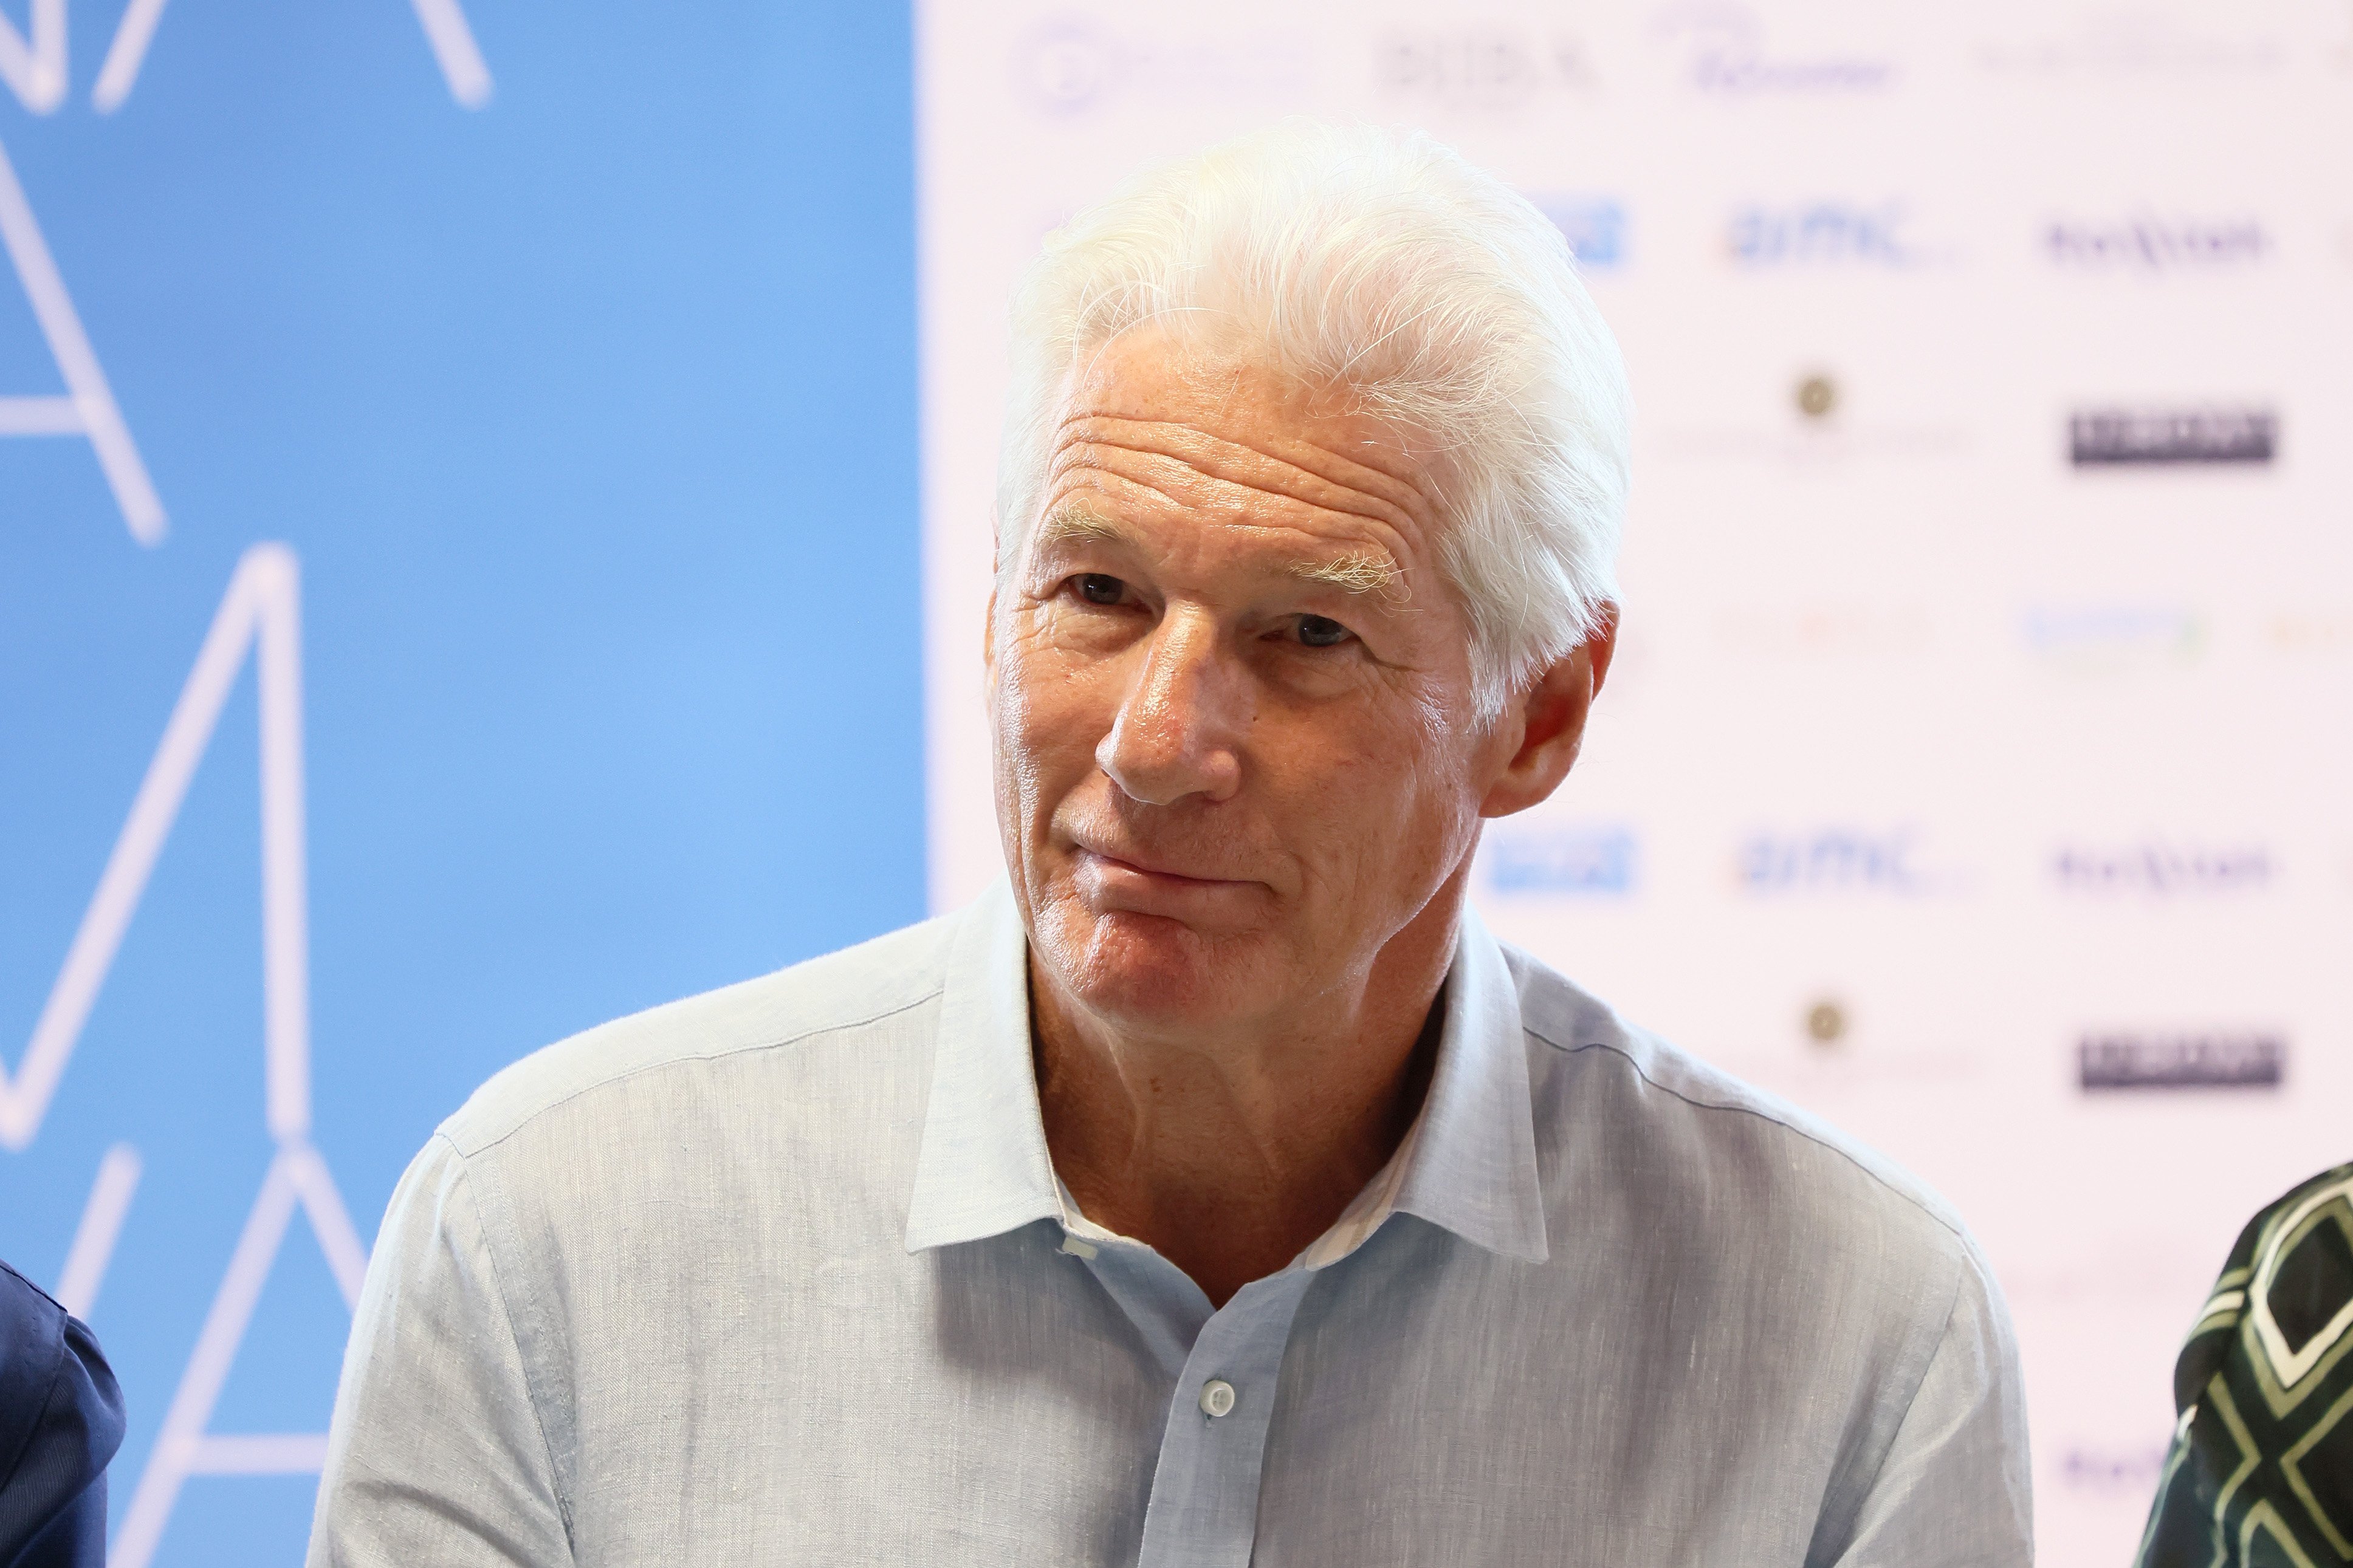 Richard Gere speaks with the media during a press conference at the Magna Graecia Film Festival at Cittadella Regionale 2022 on August 05, 2022 in Catanzaro, Italy. | Source: Getty Images